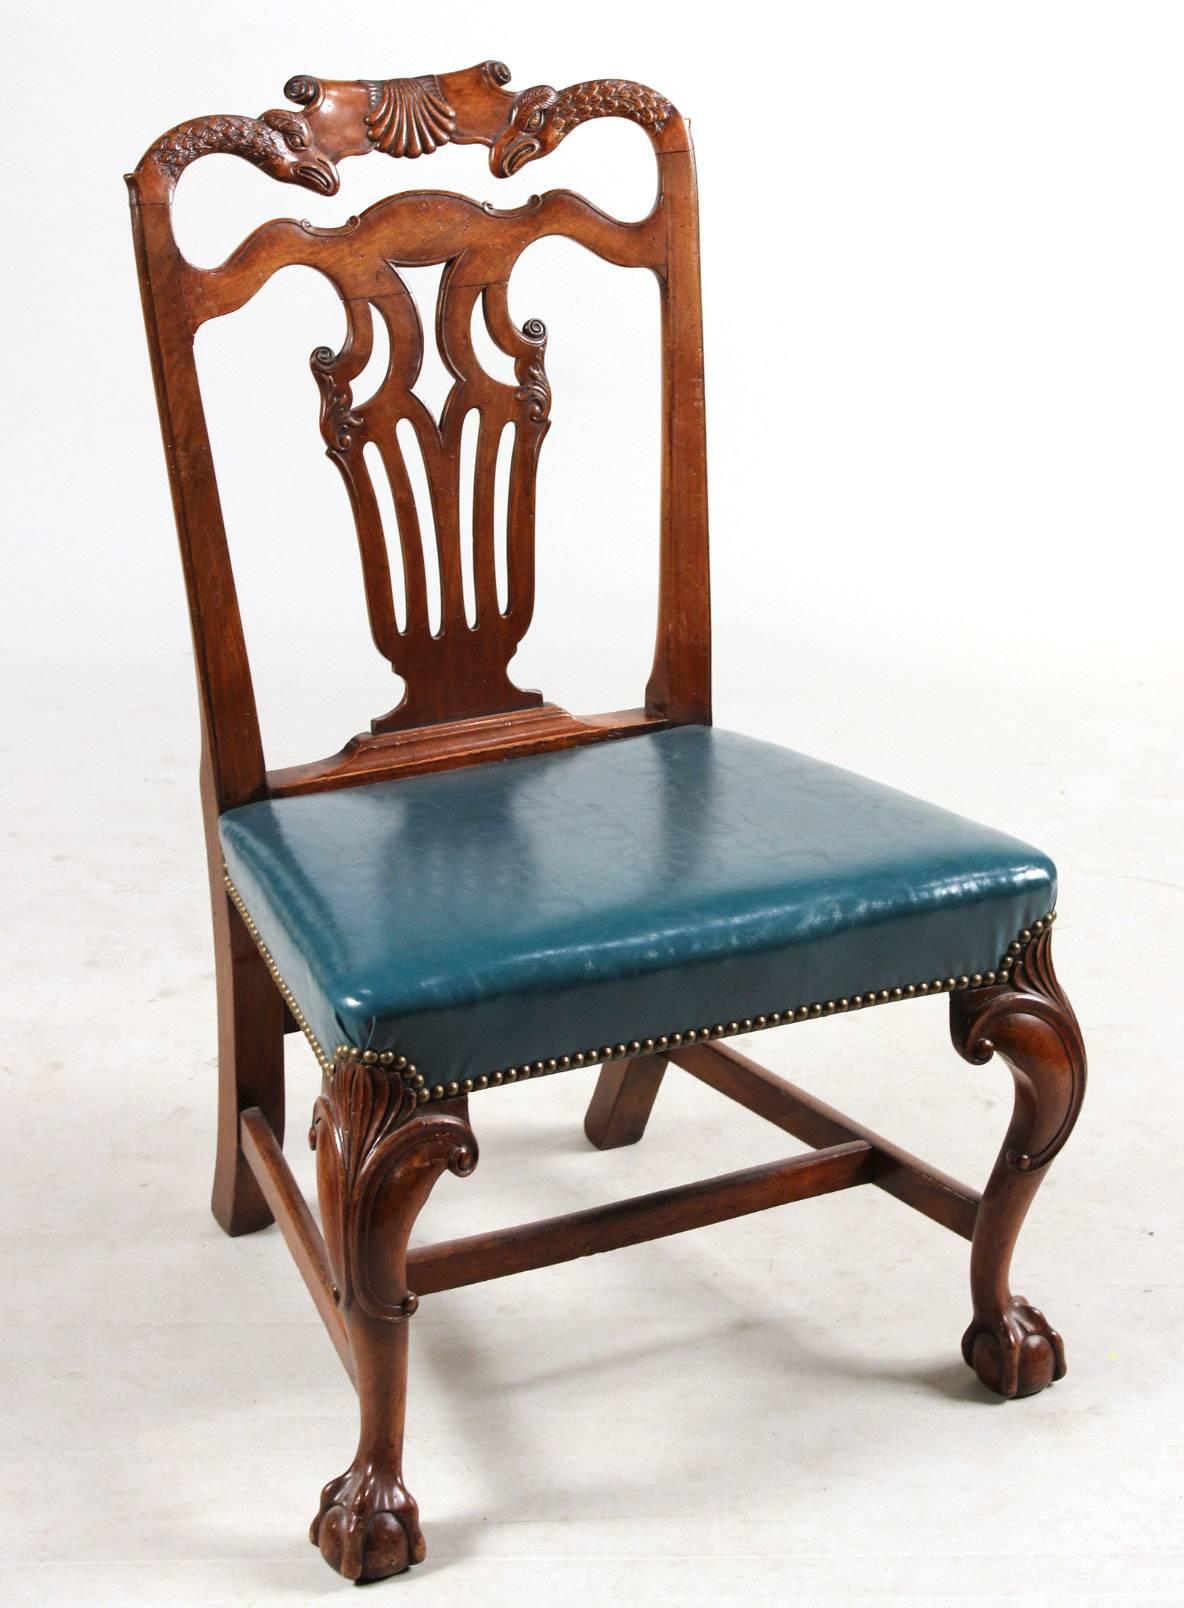 19th century irish Georgian dining chairs.

Two arms and eight sides.
Mortise and tenon throughout.
Carved Eagle back rests and Eagle armrests.
Ball and claw feet.
 